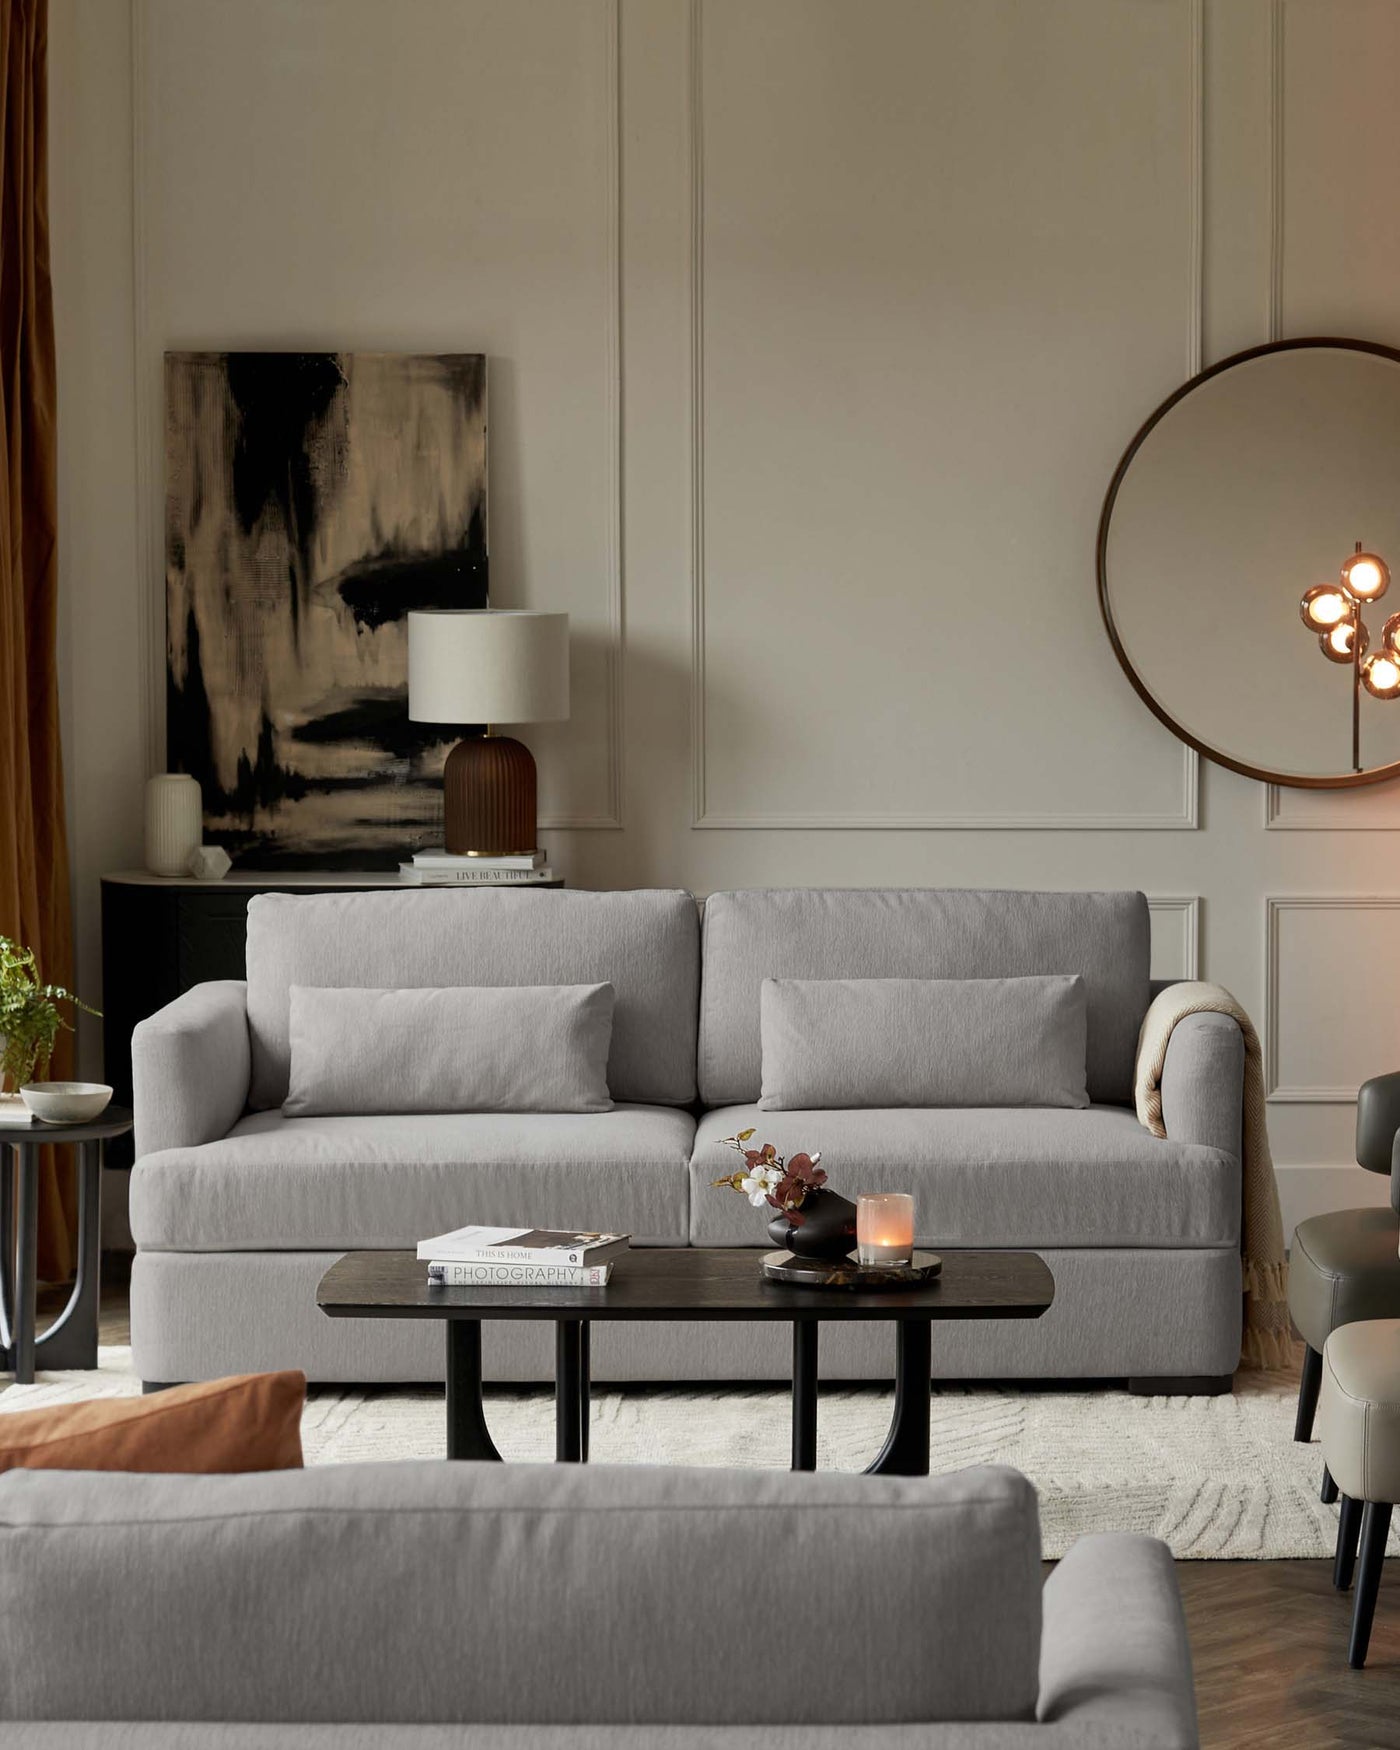 Elegant living room furnished with a contemporary grey upholstered sofa featuring plush cushions, paired with a matching armchair. Central to the space is an oval-shaped black coffee table with a minimalist design. The room also includes a small side table with a unique round lamp, complementing the modern aesthetic of the setting.